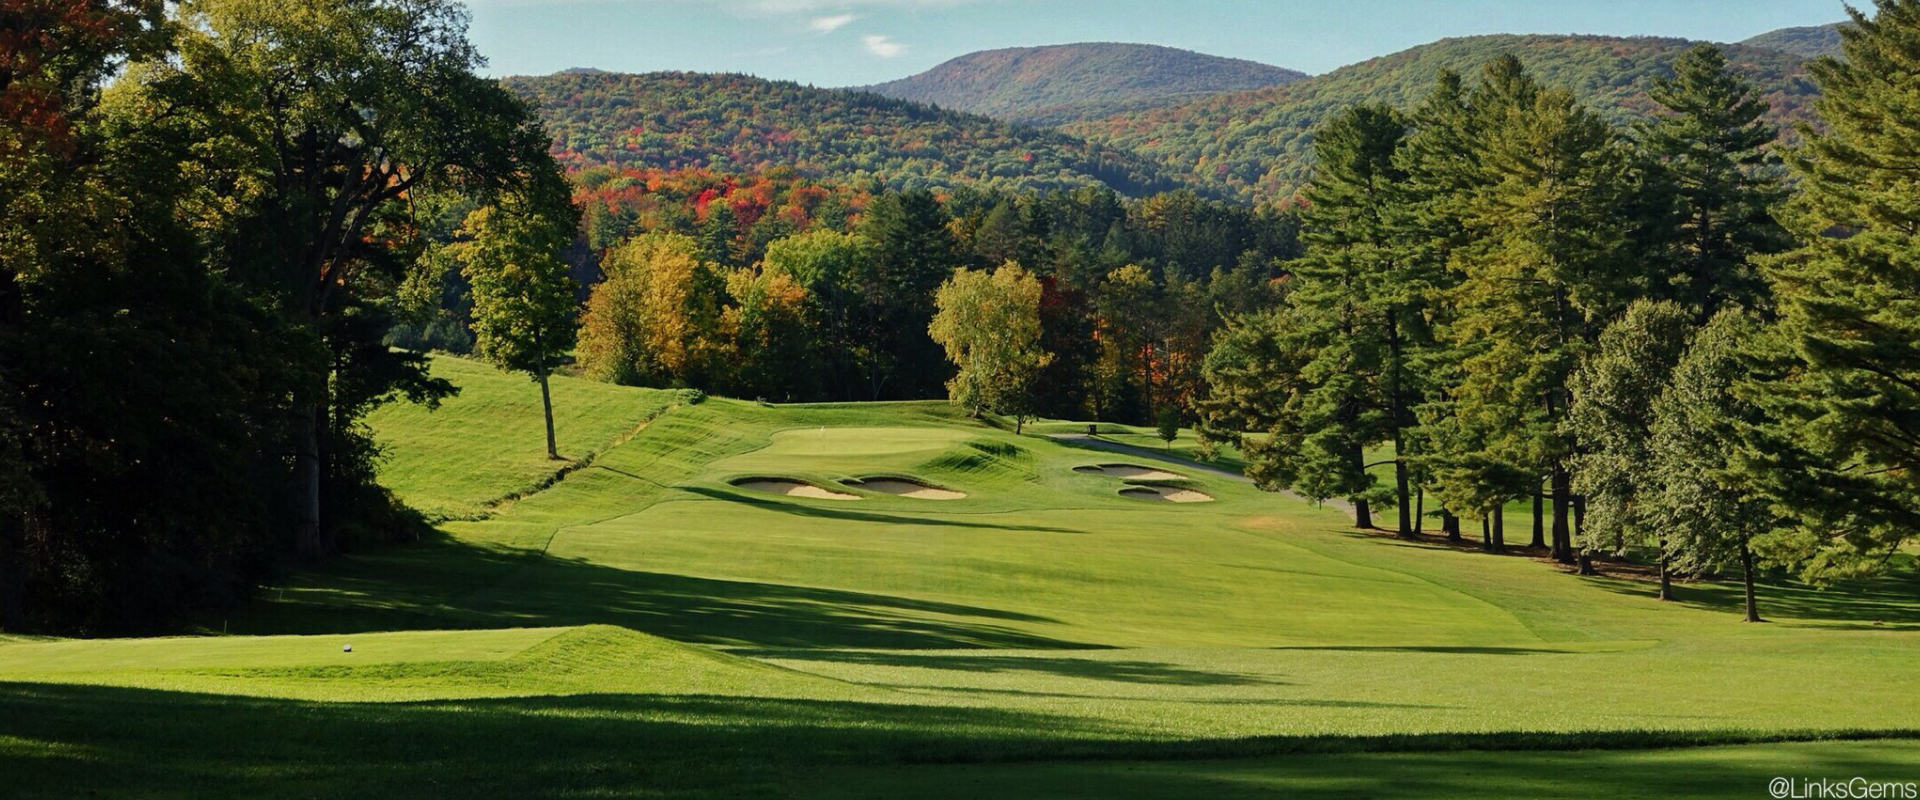 Welcome to Taconic Golf Club